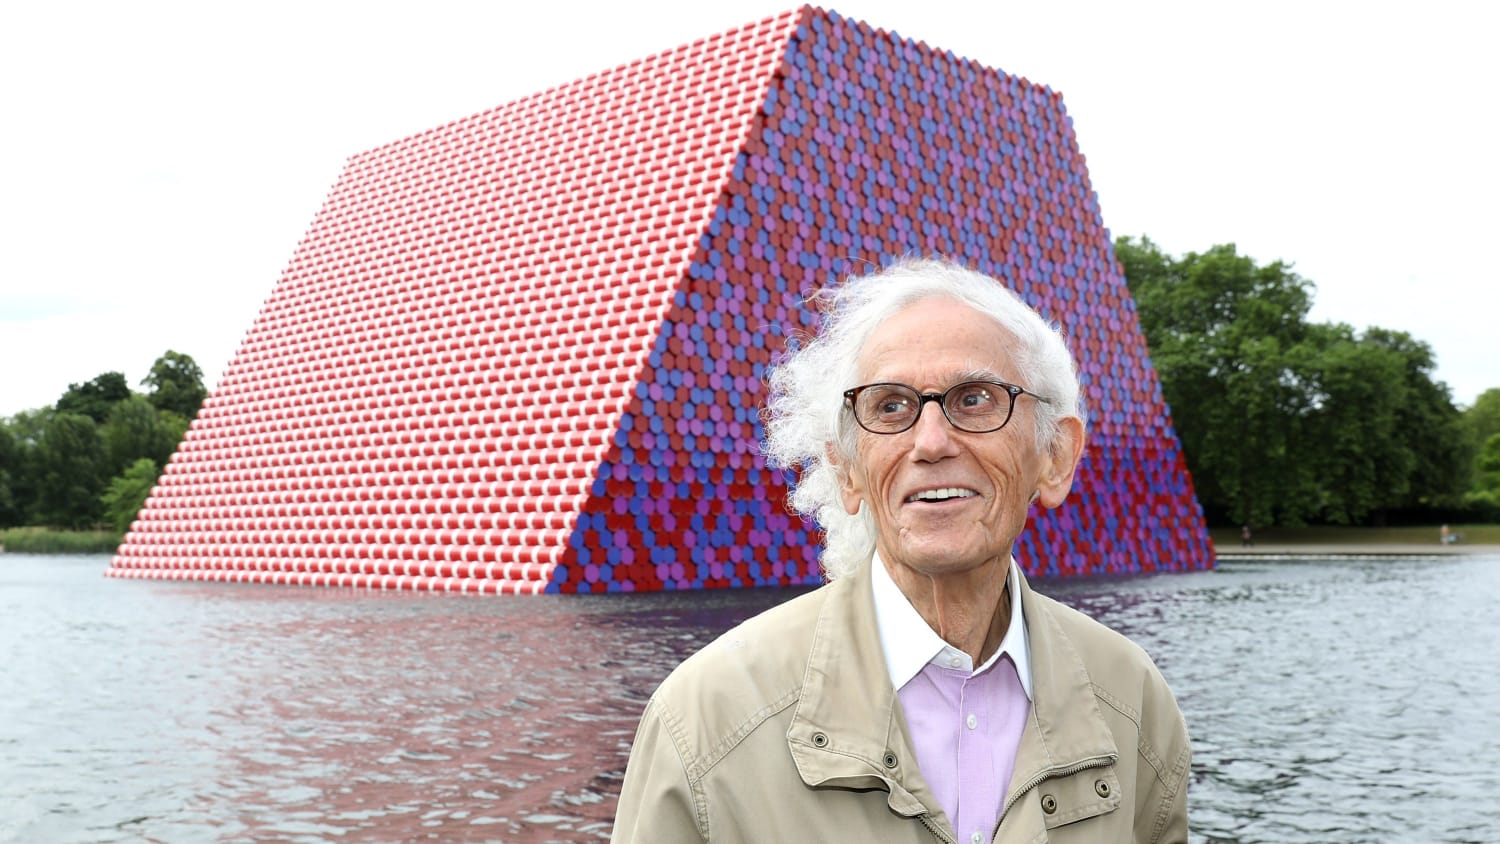 Christo, the artist famous for his fantastical, fleeting public displays, dies at 84